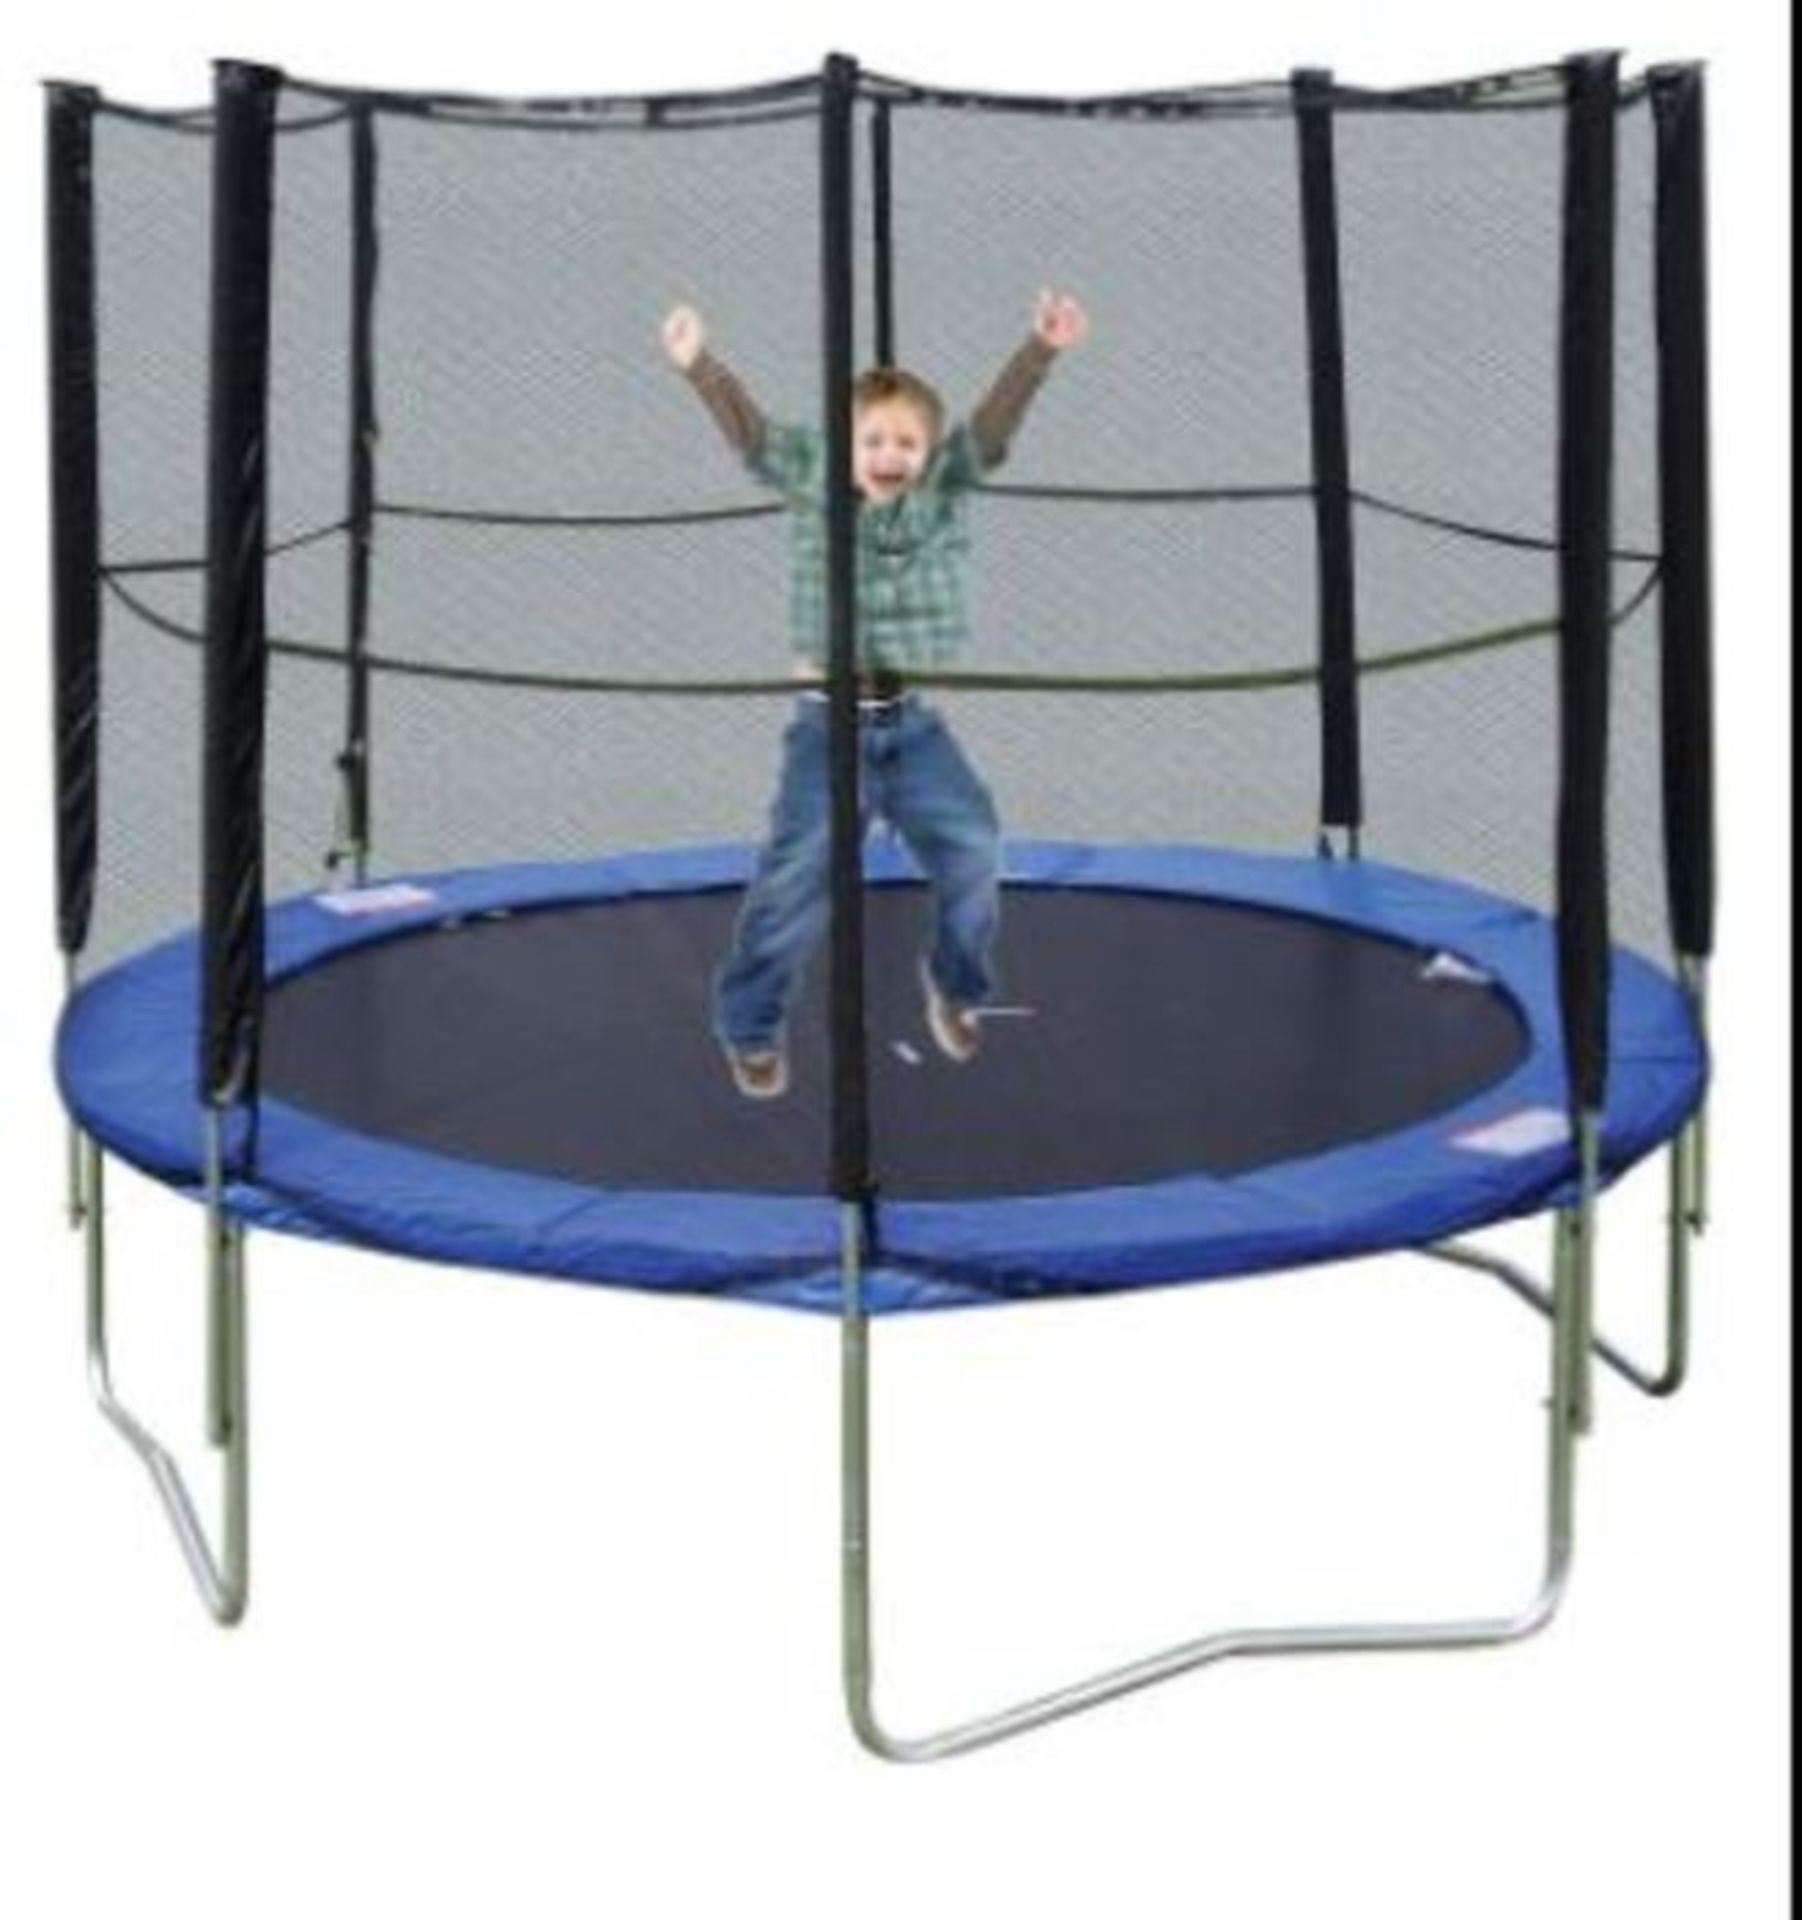 1 X HEDSTROM 8FT TRAMPOLINE WITH ENCLOSURE / RRP £99.99 / UNTESTED CUSTOMER RETURNS